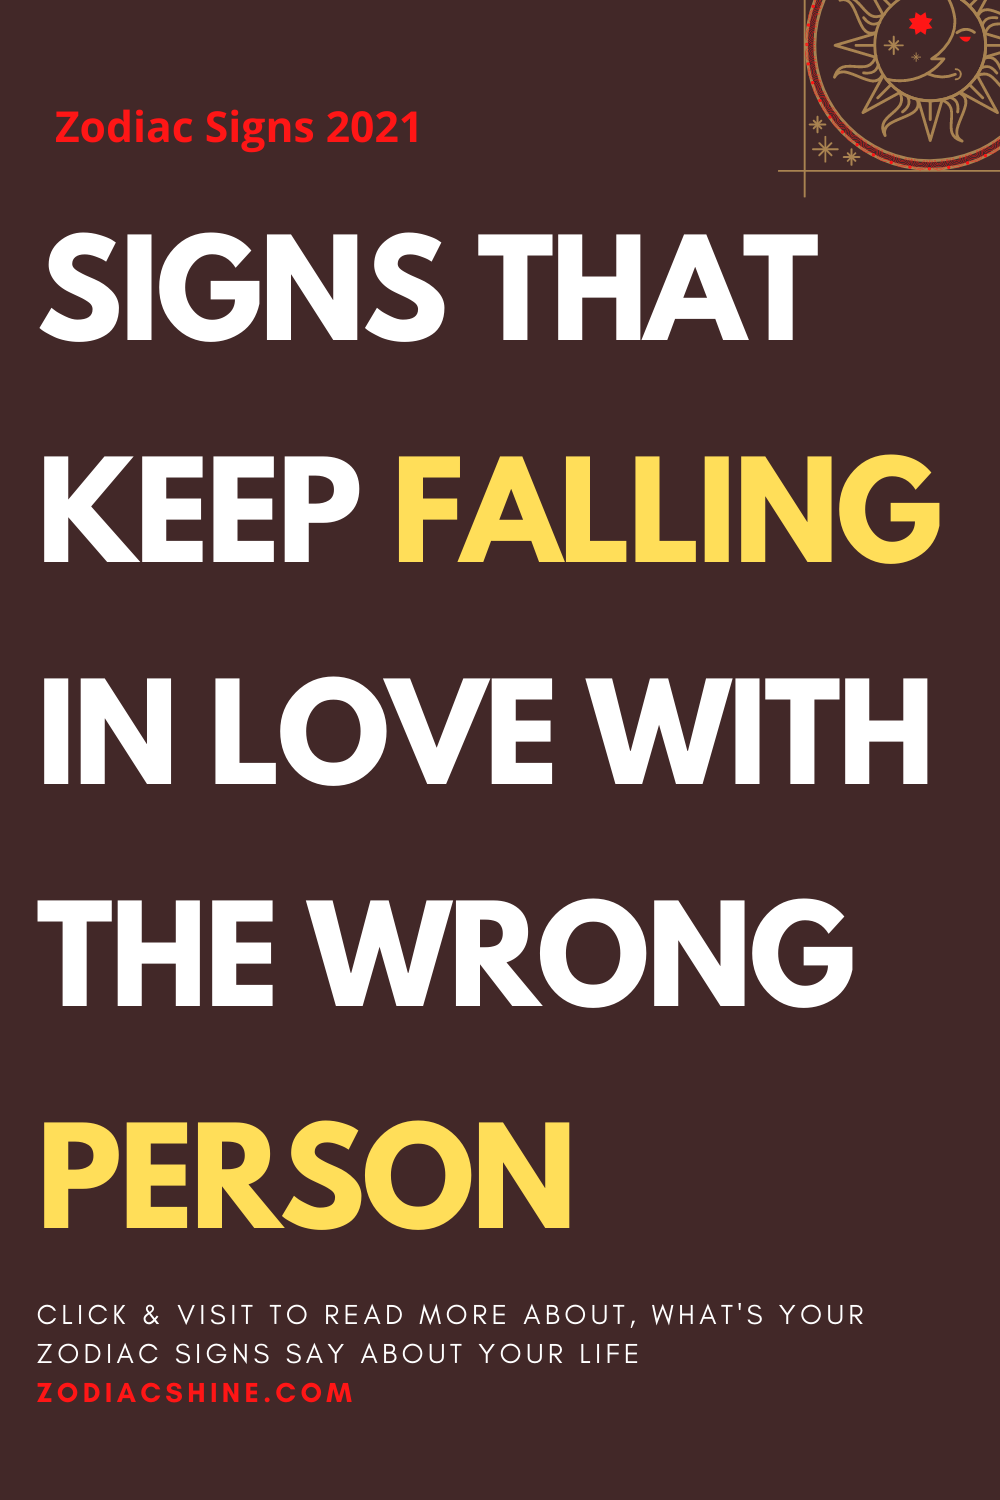 SIGNS THAT KEEP FALLING IN LOVE WITH THE WRONG PERSON